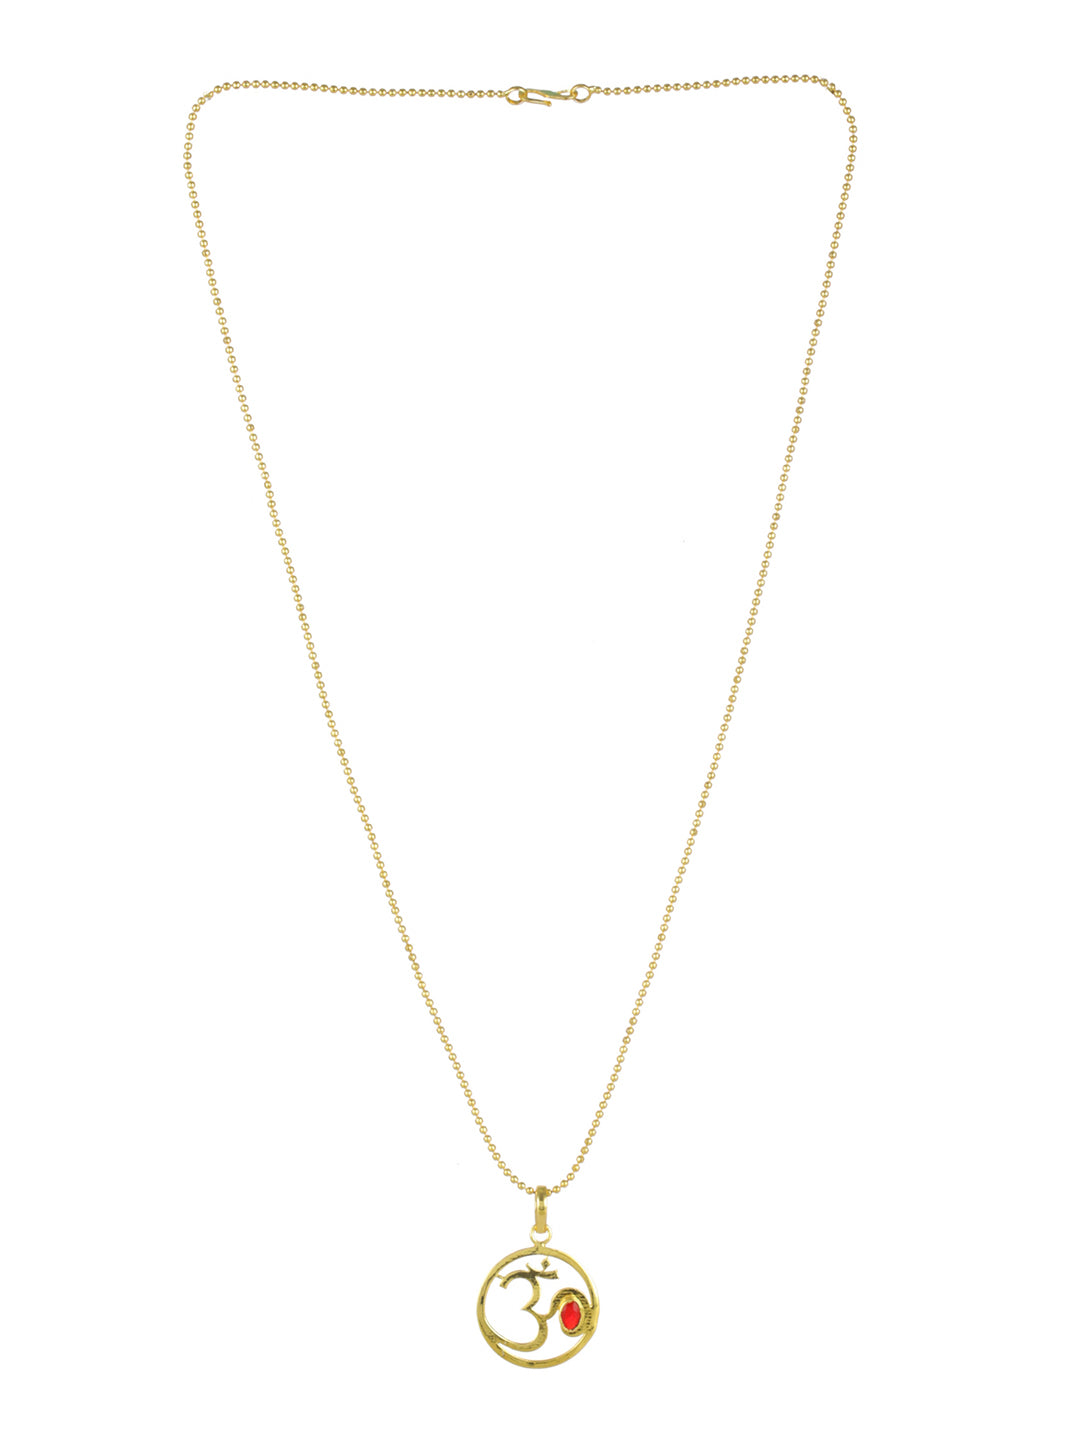 Bold by Priyaasi OM Gold-Plated Necklace for Men